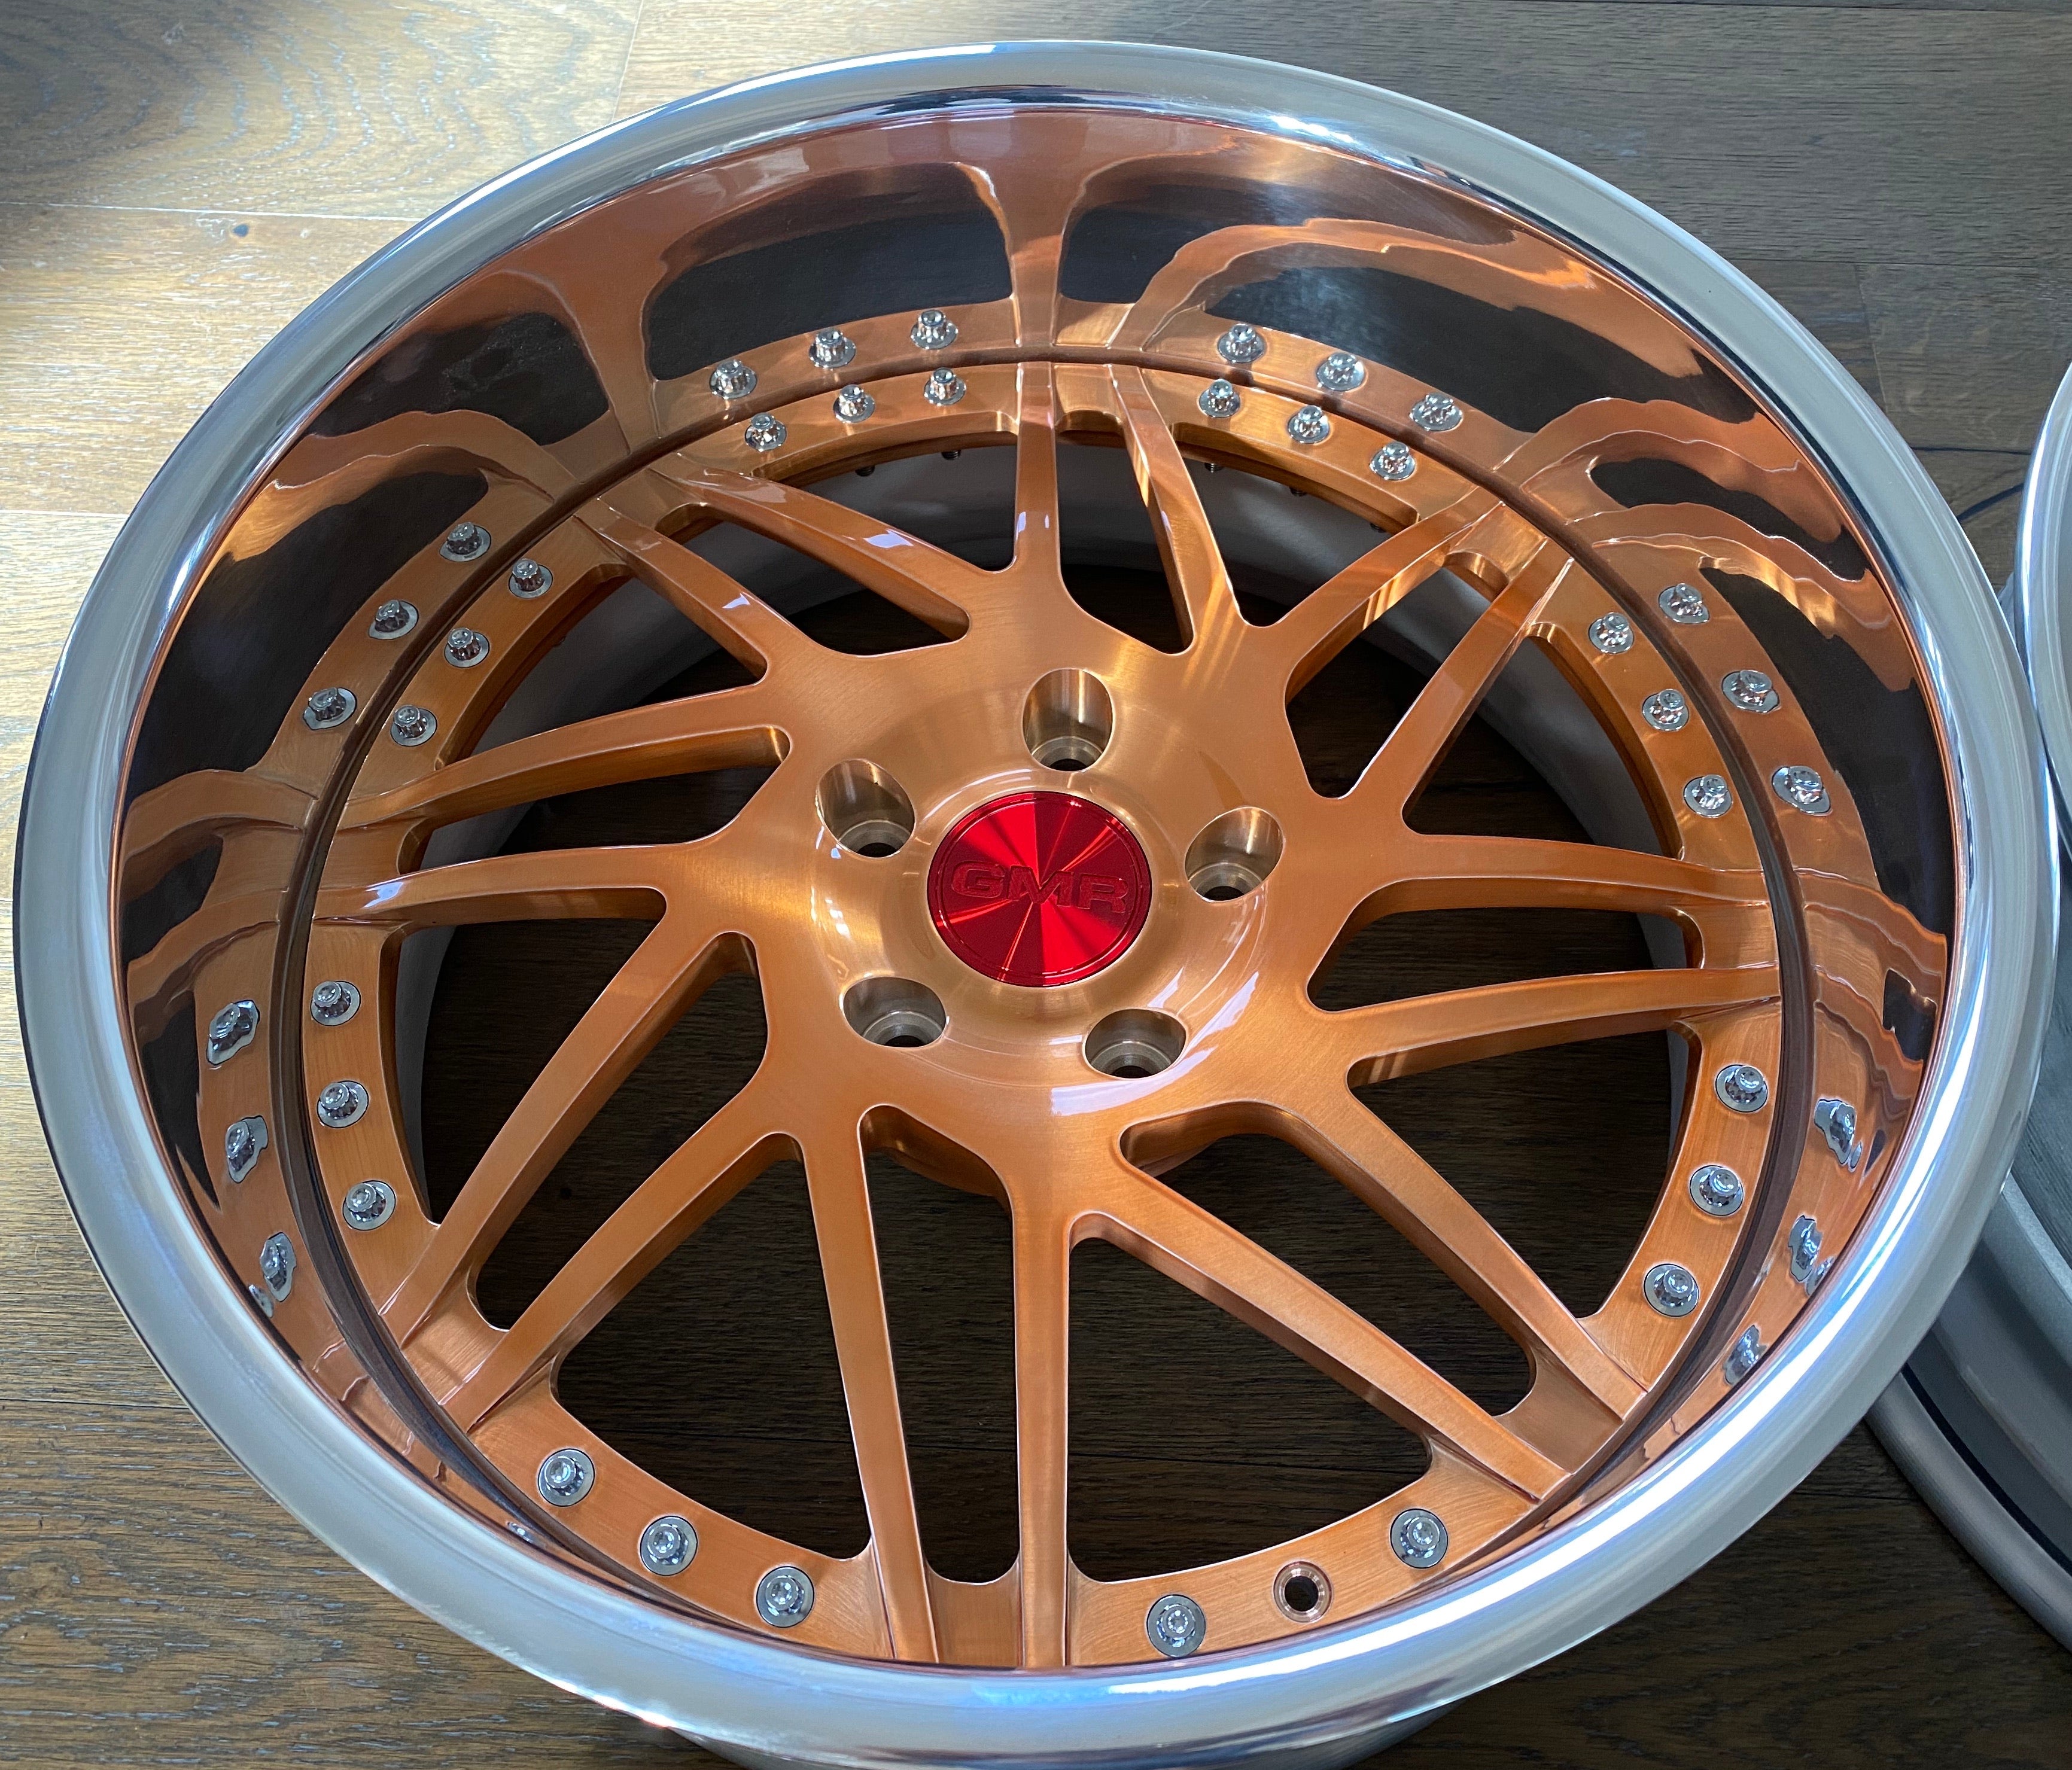 18” GMR GS-107 5x120 *BUILT TO ORDER*